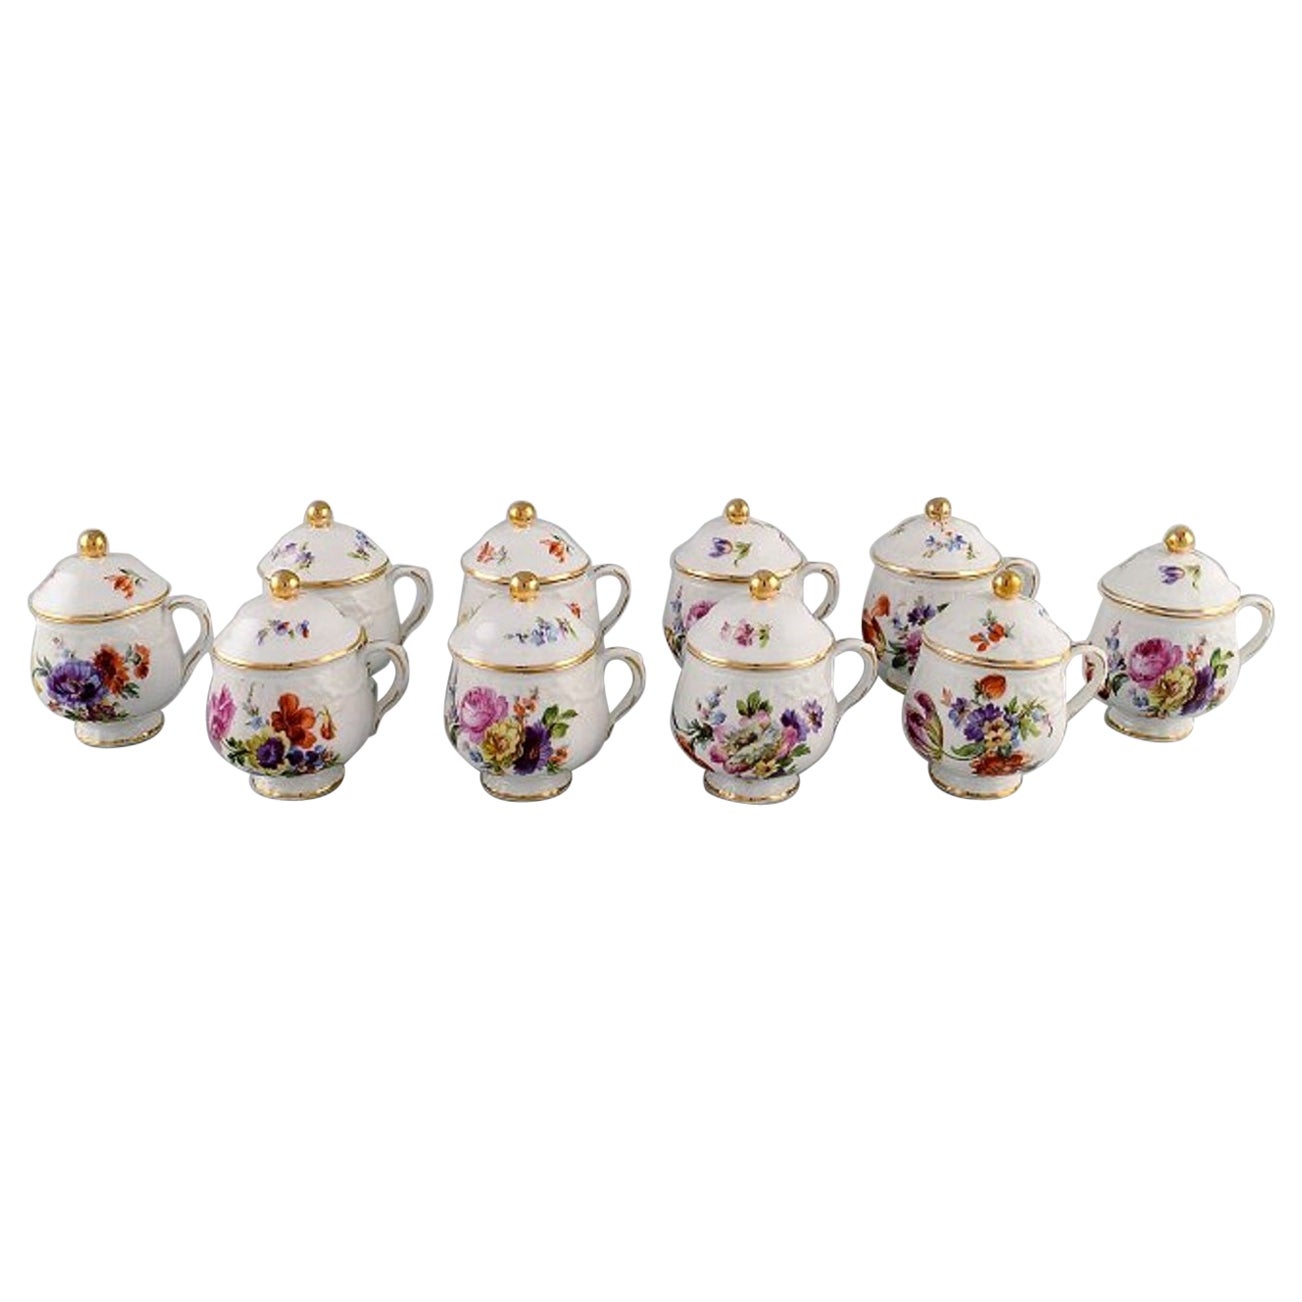 10 Antique Rörstrand Porcelain Cream Cups with Hand-Painted Flowers For Sale